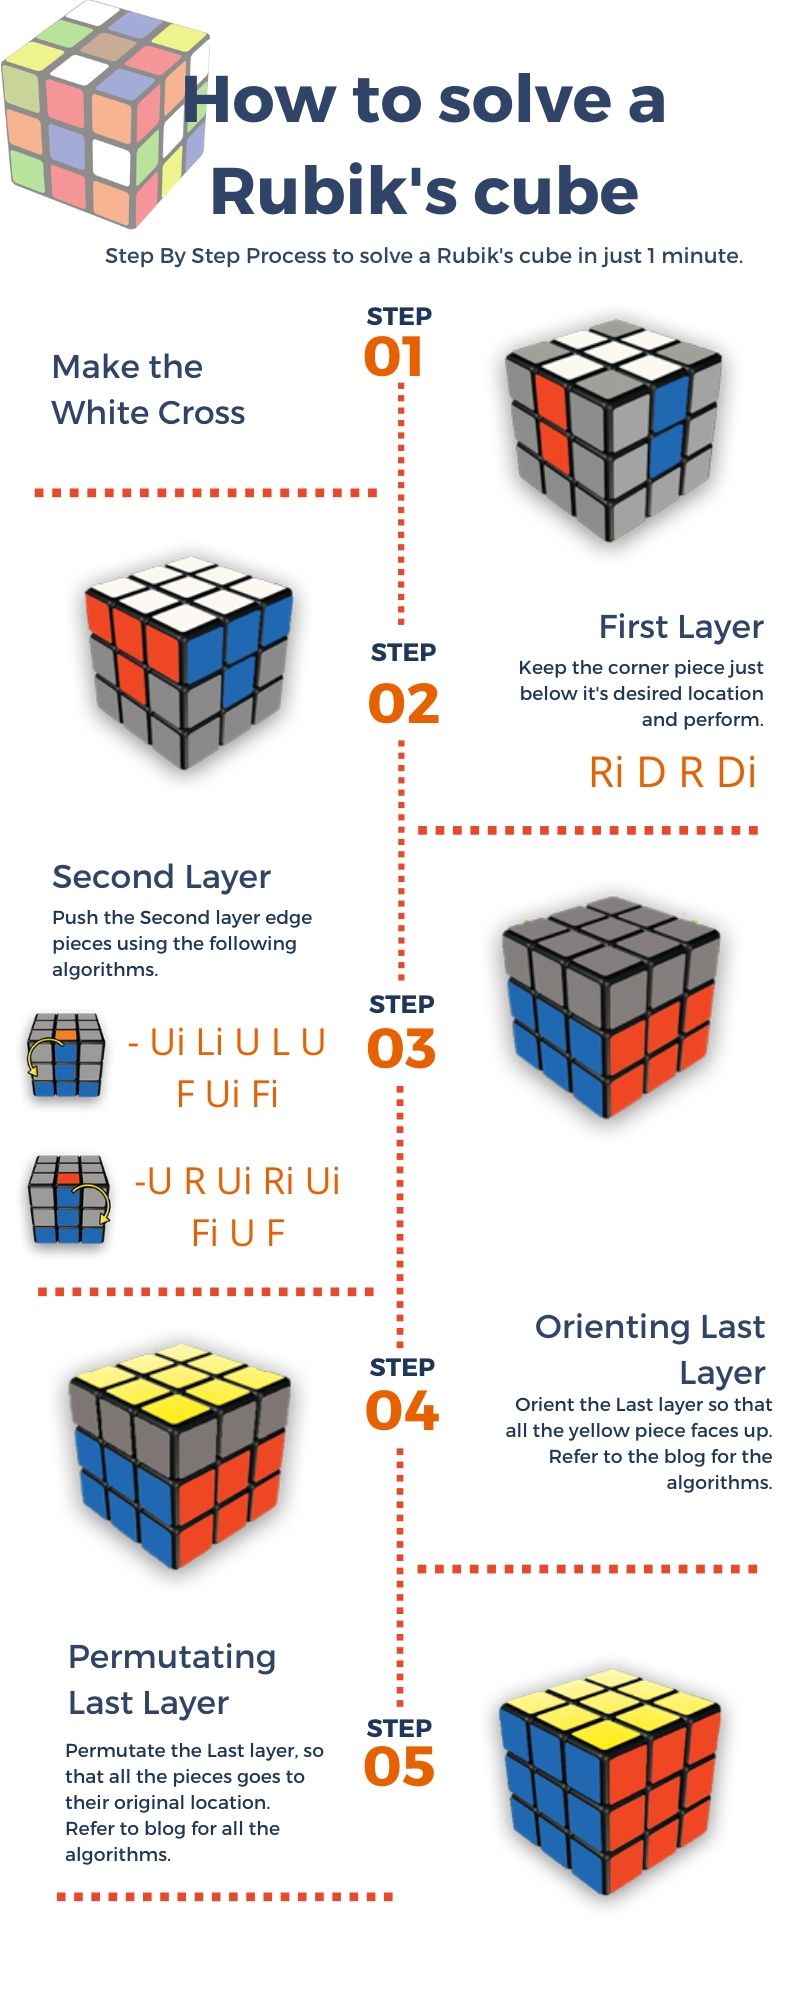 Step By Step Guideline To Solve Rubiks Cube, For Beginner, 48% OFF